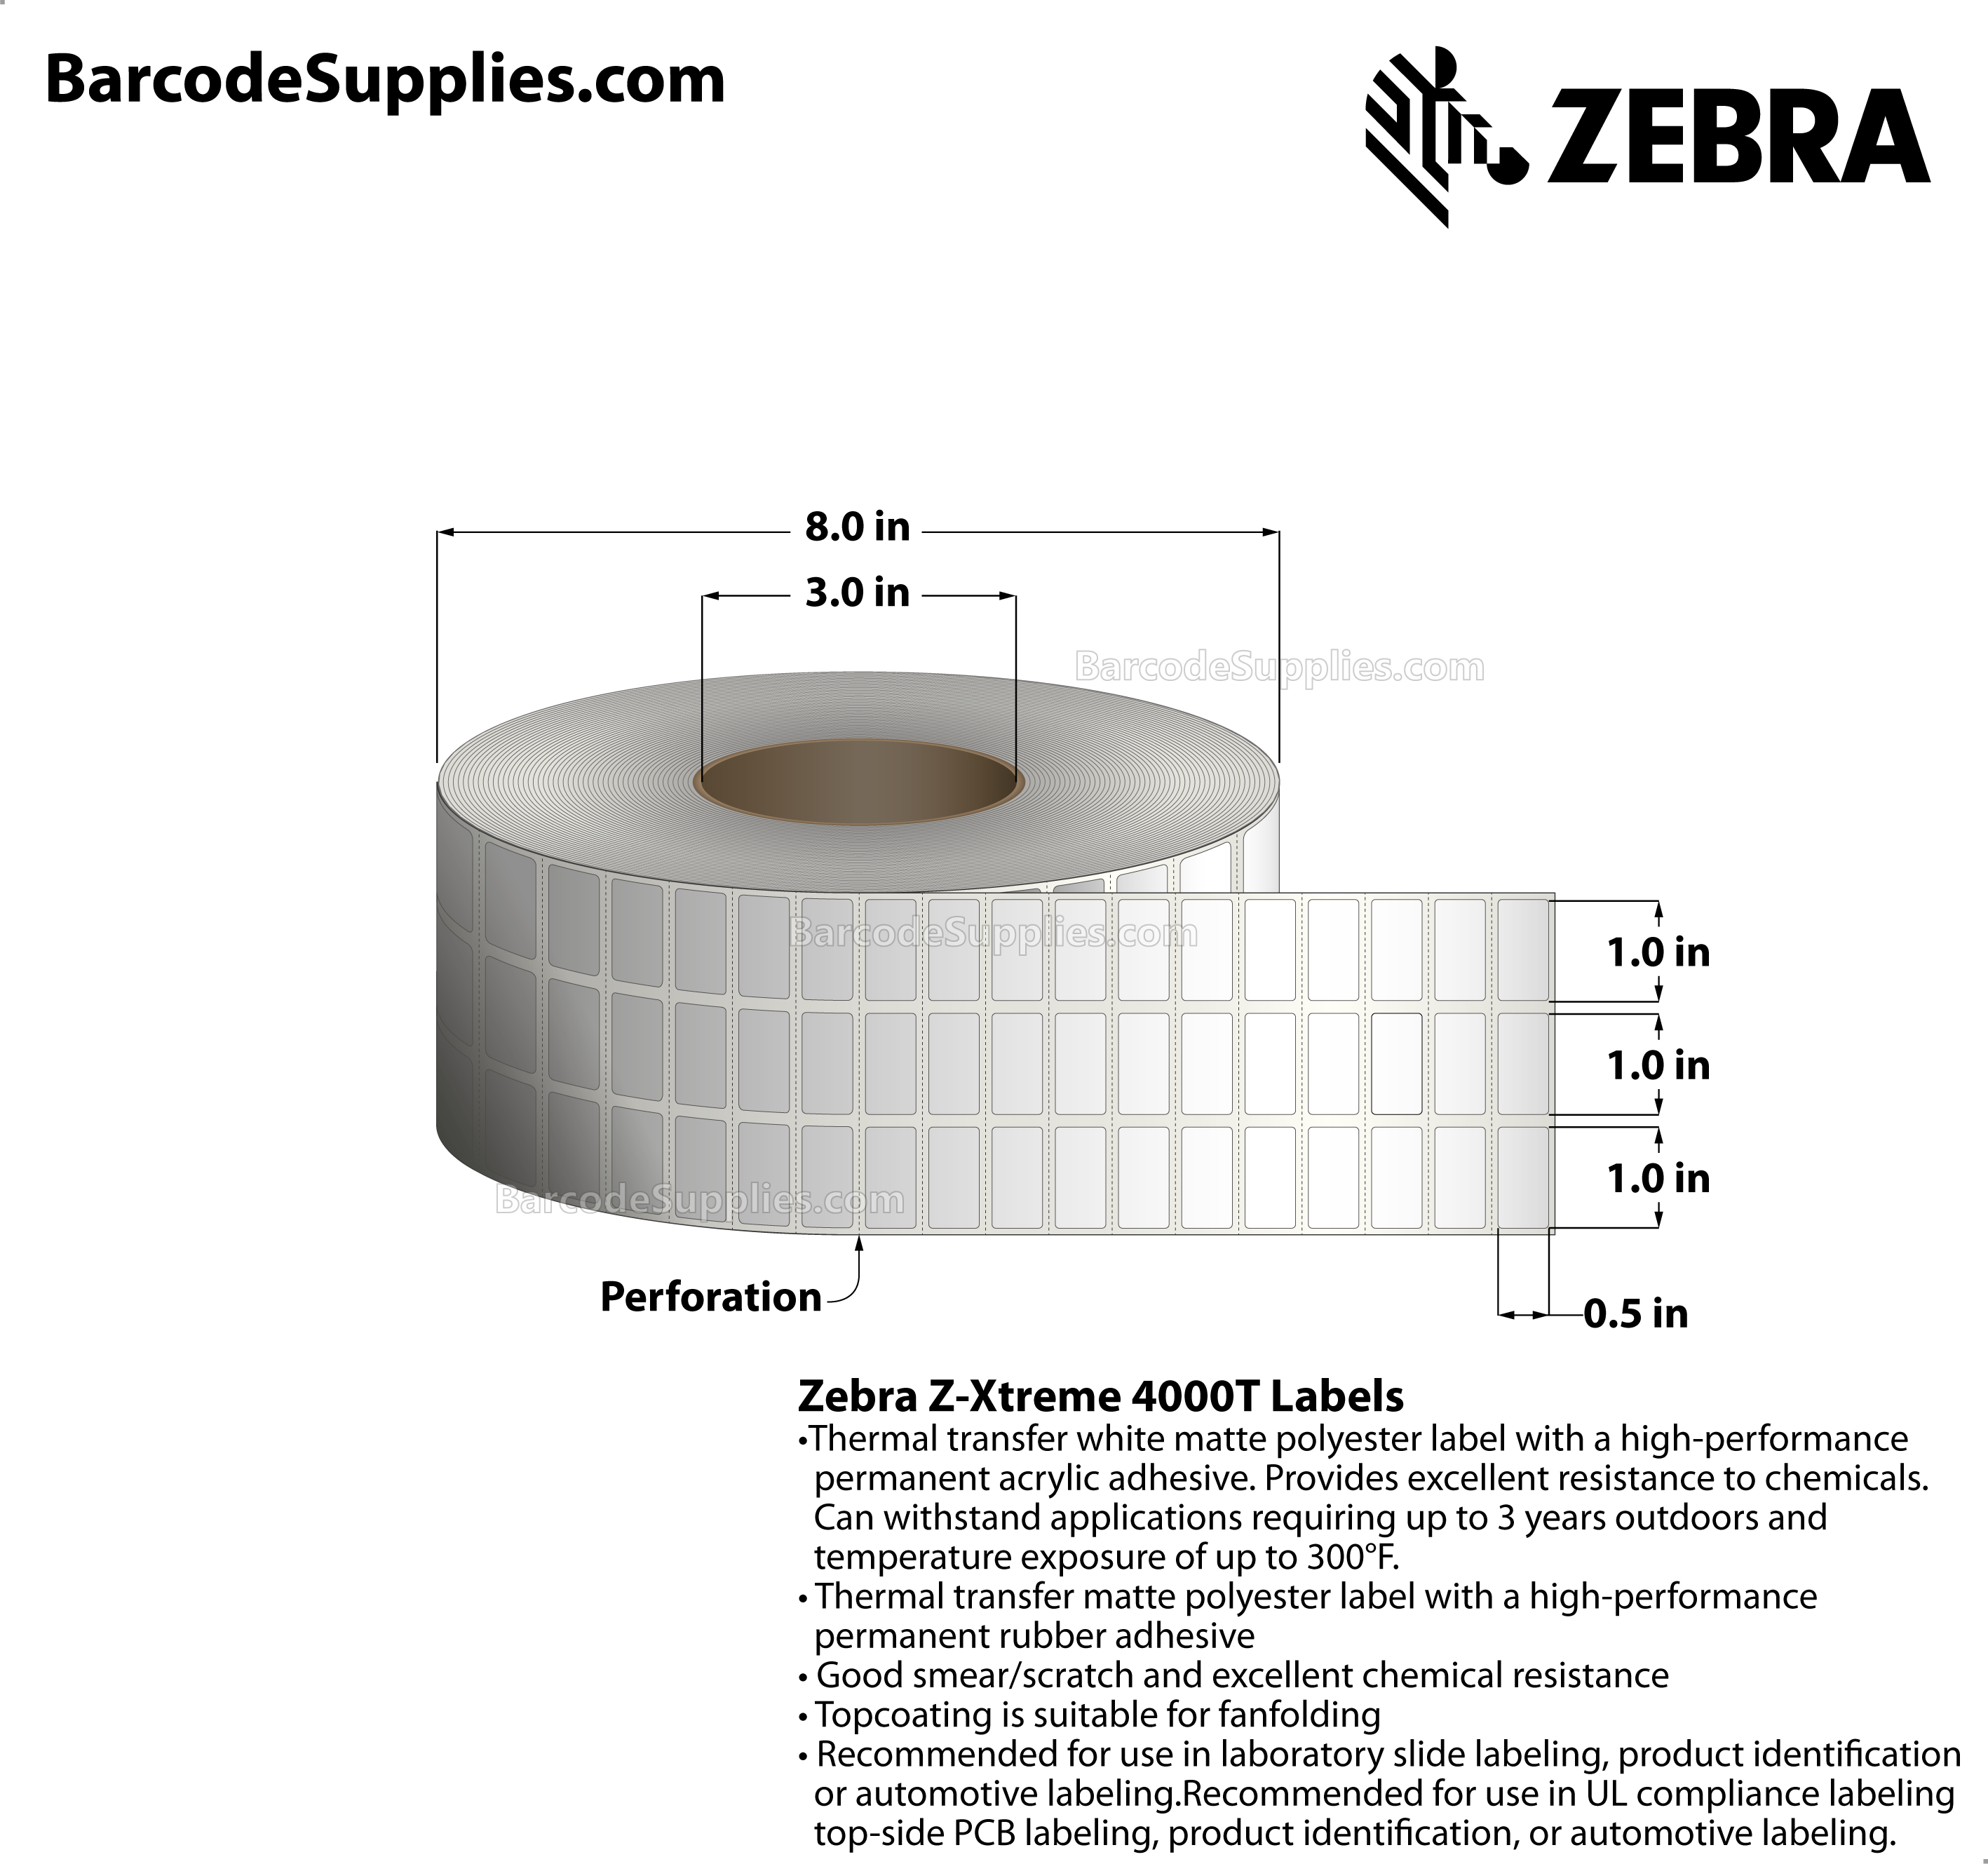 1 x 0.5 Thermal Transfer White Z-Xtreme 4000T White (3-Across) Labels With Permanent Adhesive - Perforated - 10002 Labels Per Roll - Carton Of 1 Rolls - 10002 Labels Total - MPN: 10023164